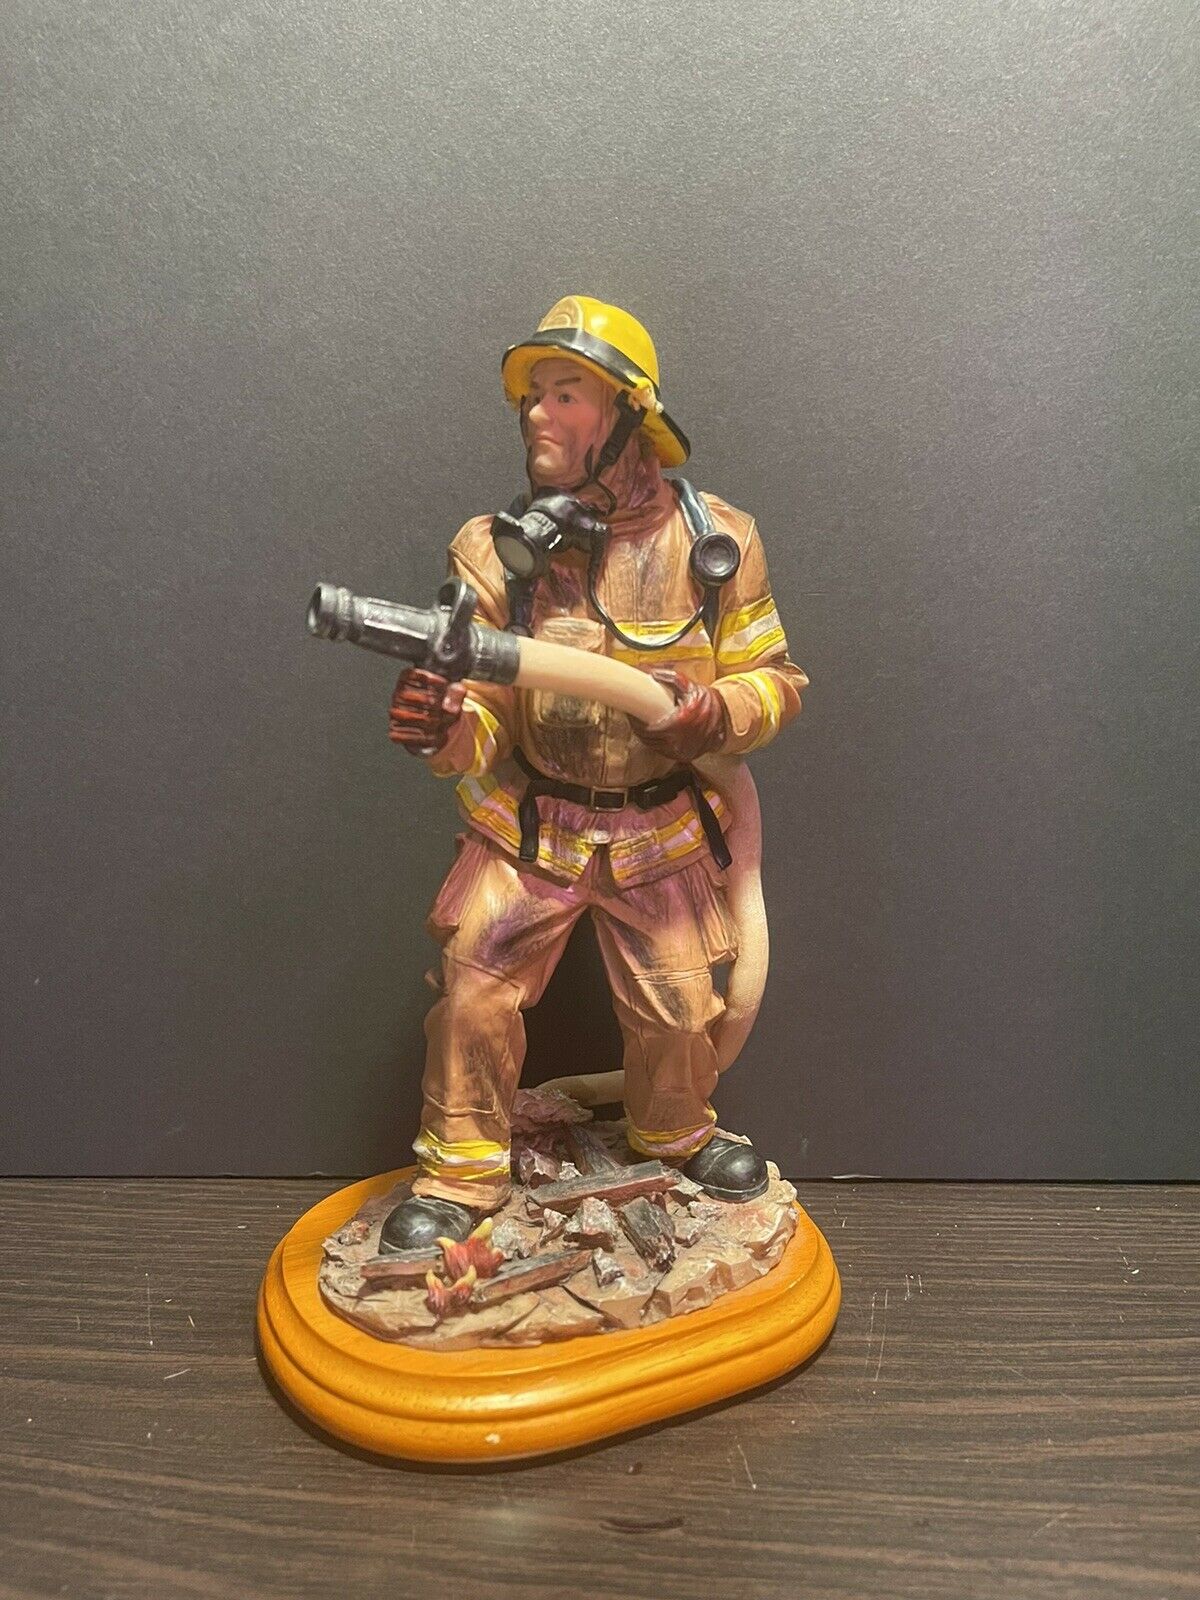 Red Hats Of Courage "going In" Retired Figurine By Vanguard Fireman